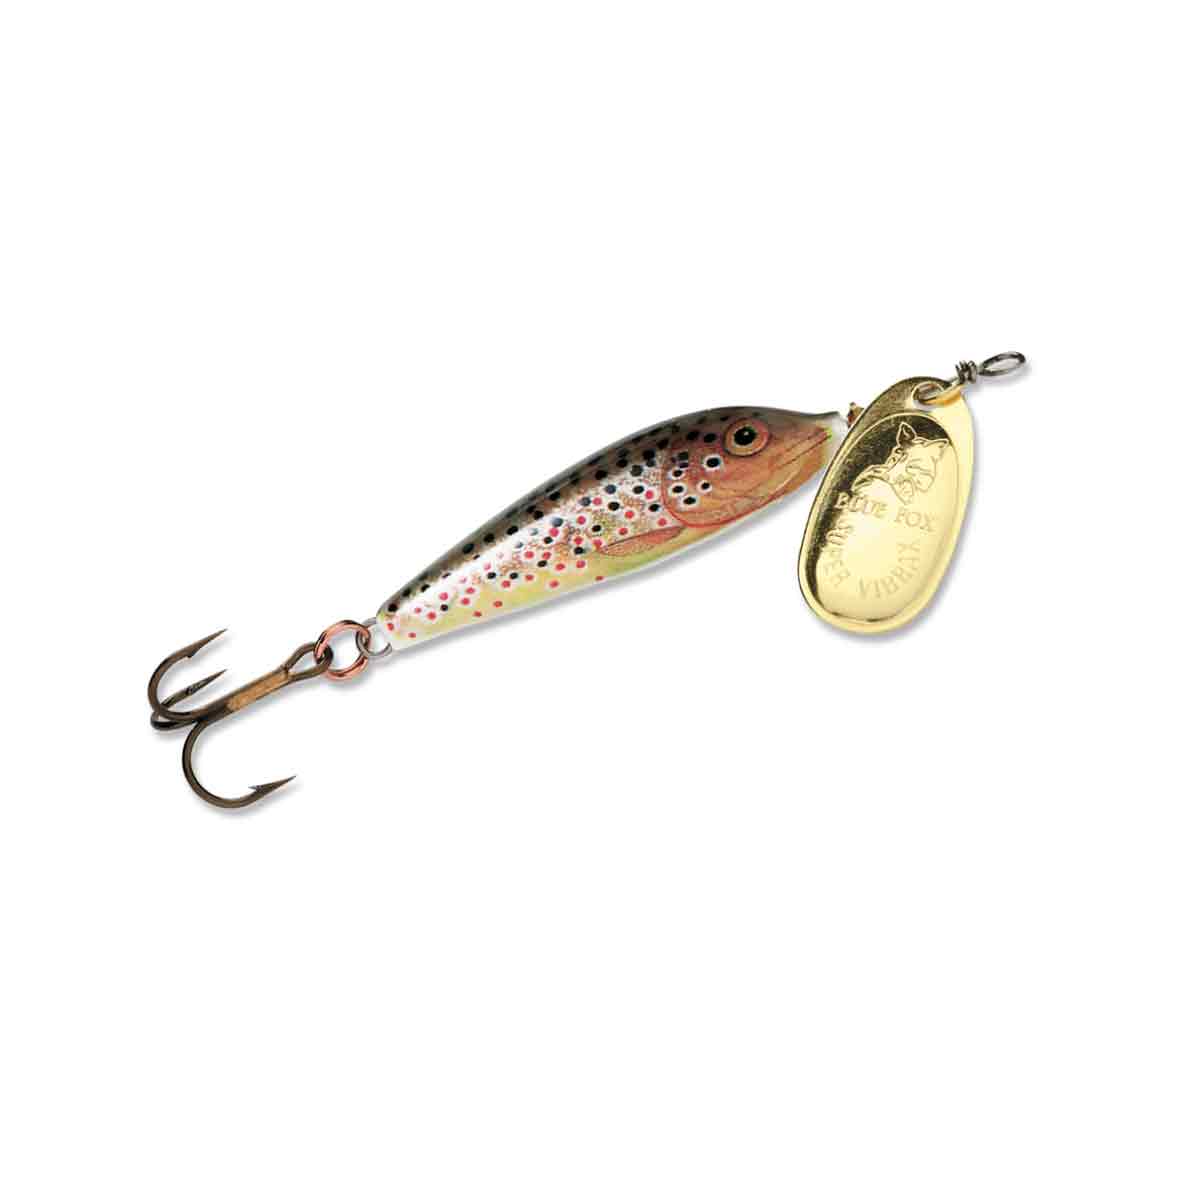 Vibrax Minnow Spin_Brown Trout/Gold